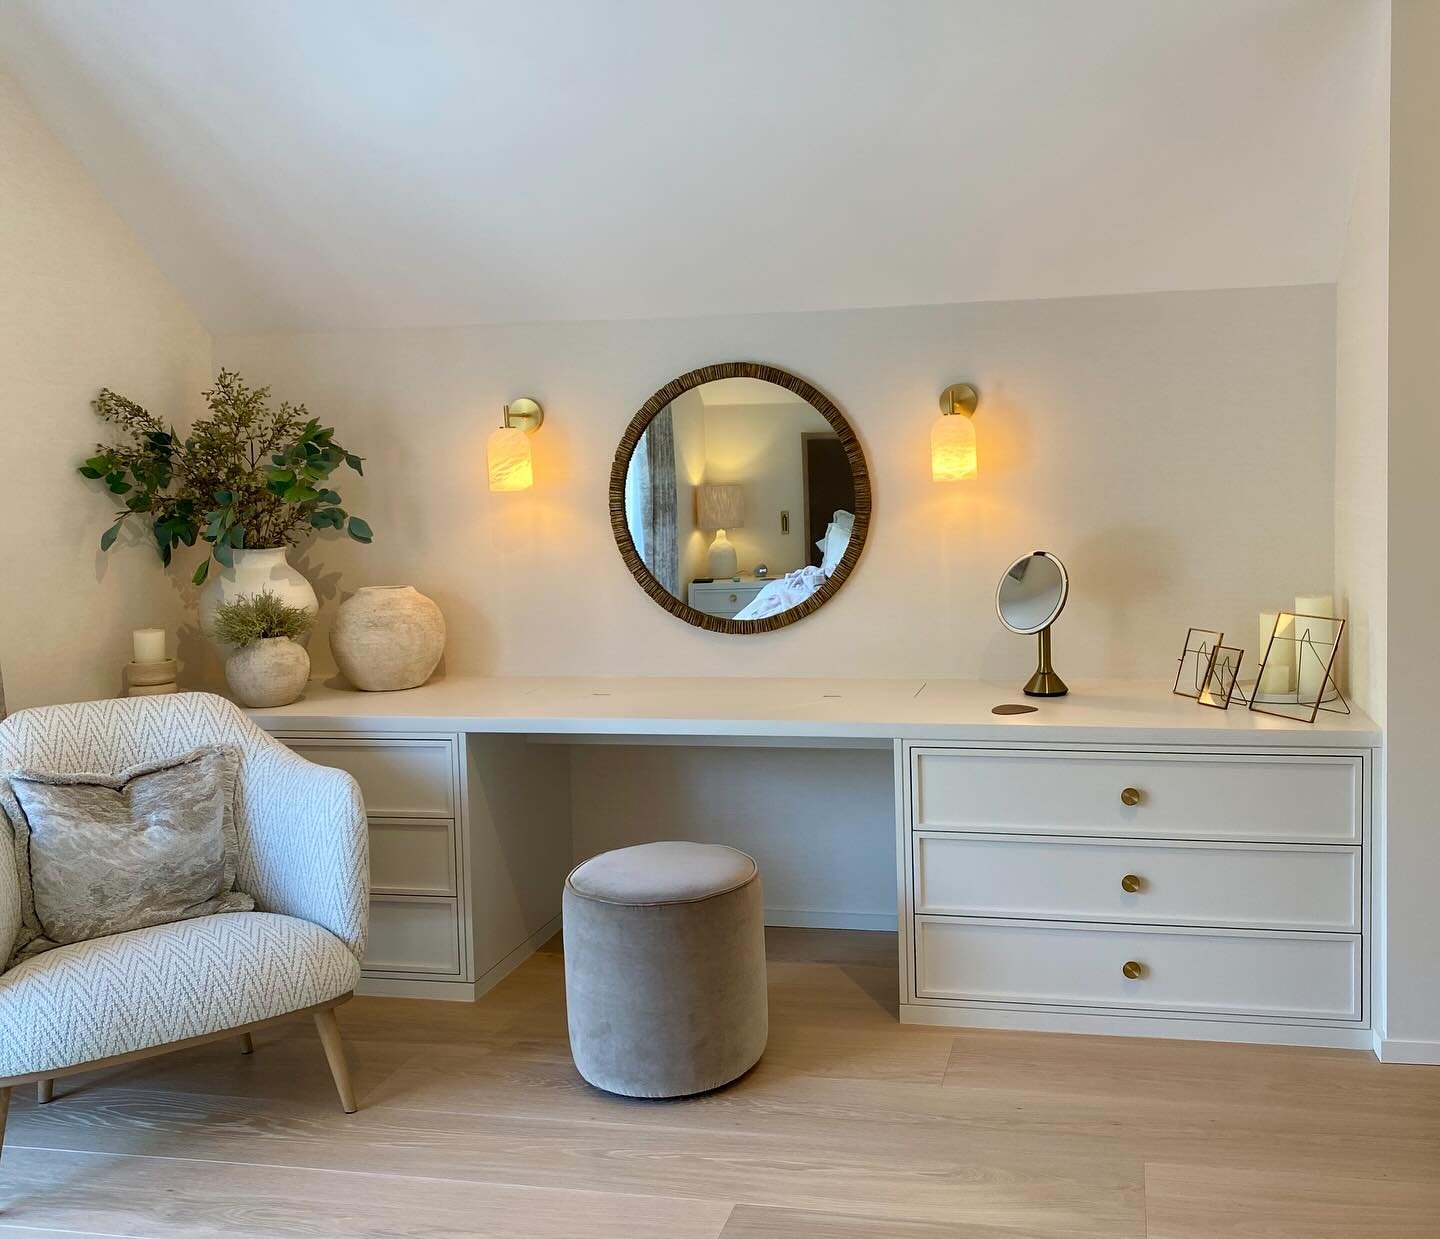 It&rsquo;s always nice to revisit a home and see the furniture once the room is complete. This dressing table looks perfect with the added wall lighting, mirror and seating.
Interior Designer @falchiinteriors 👌🏽
.
.
.
#dressingtablegoals #bespokeca